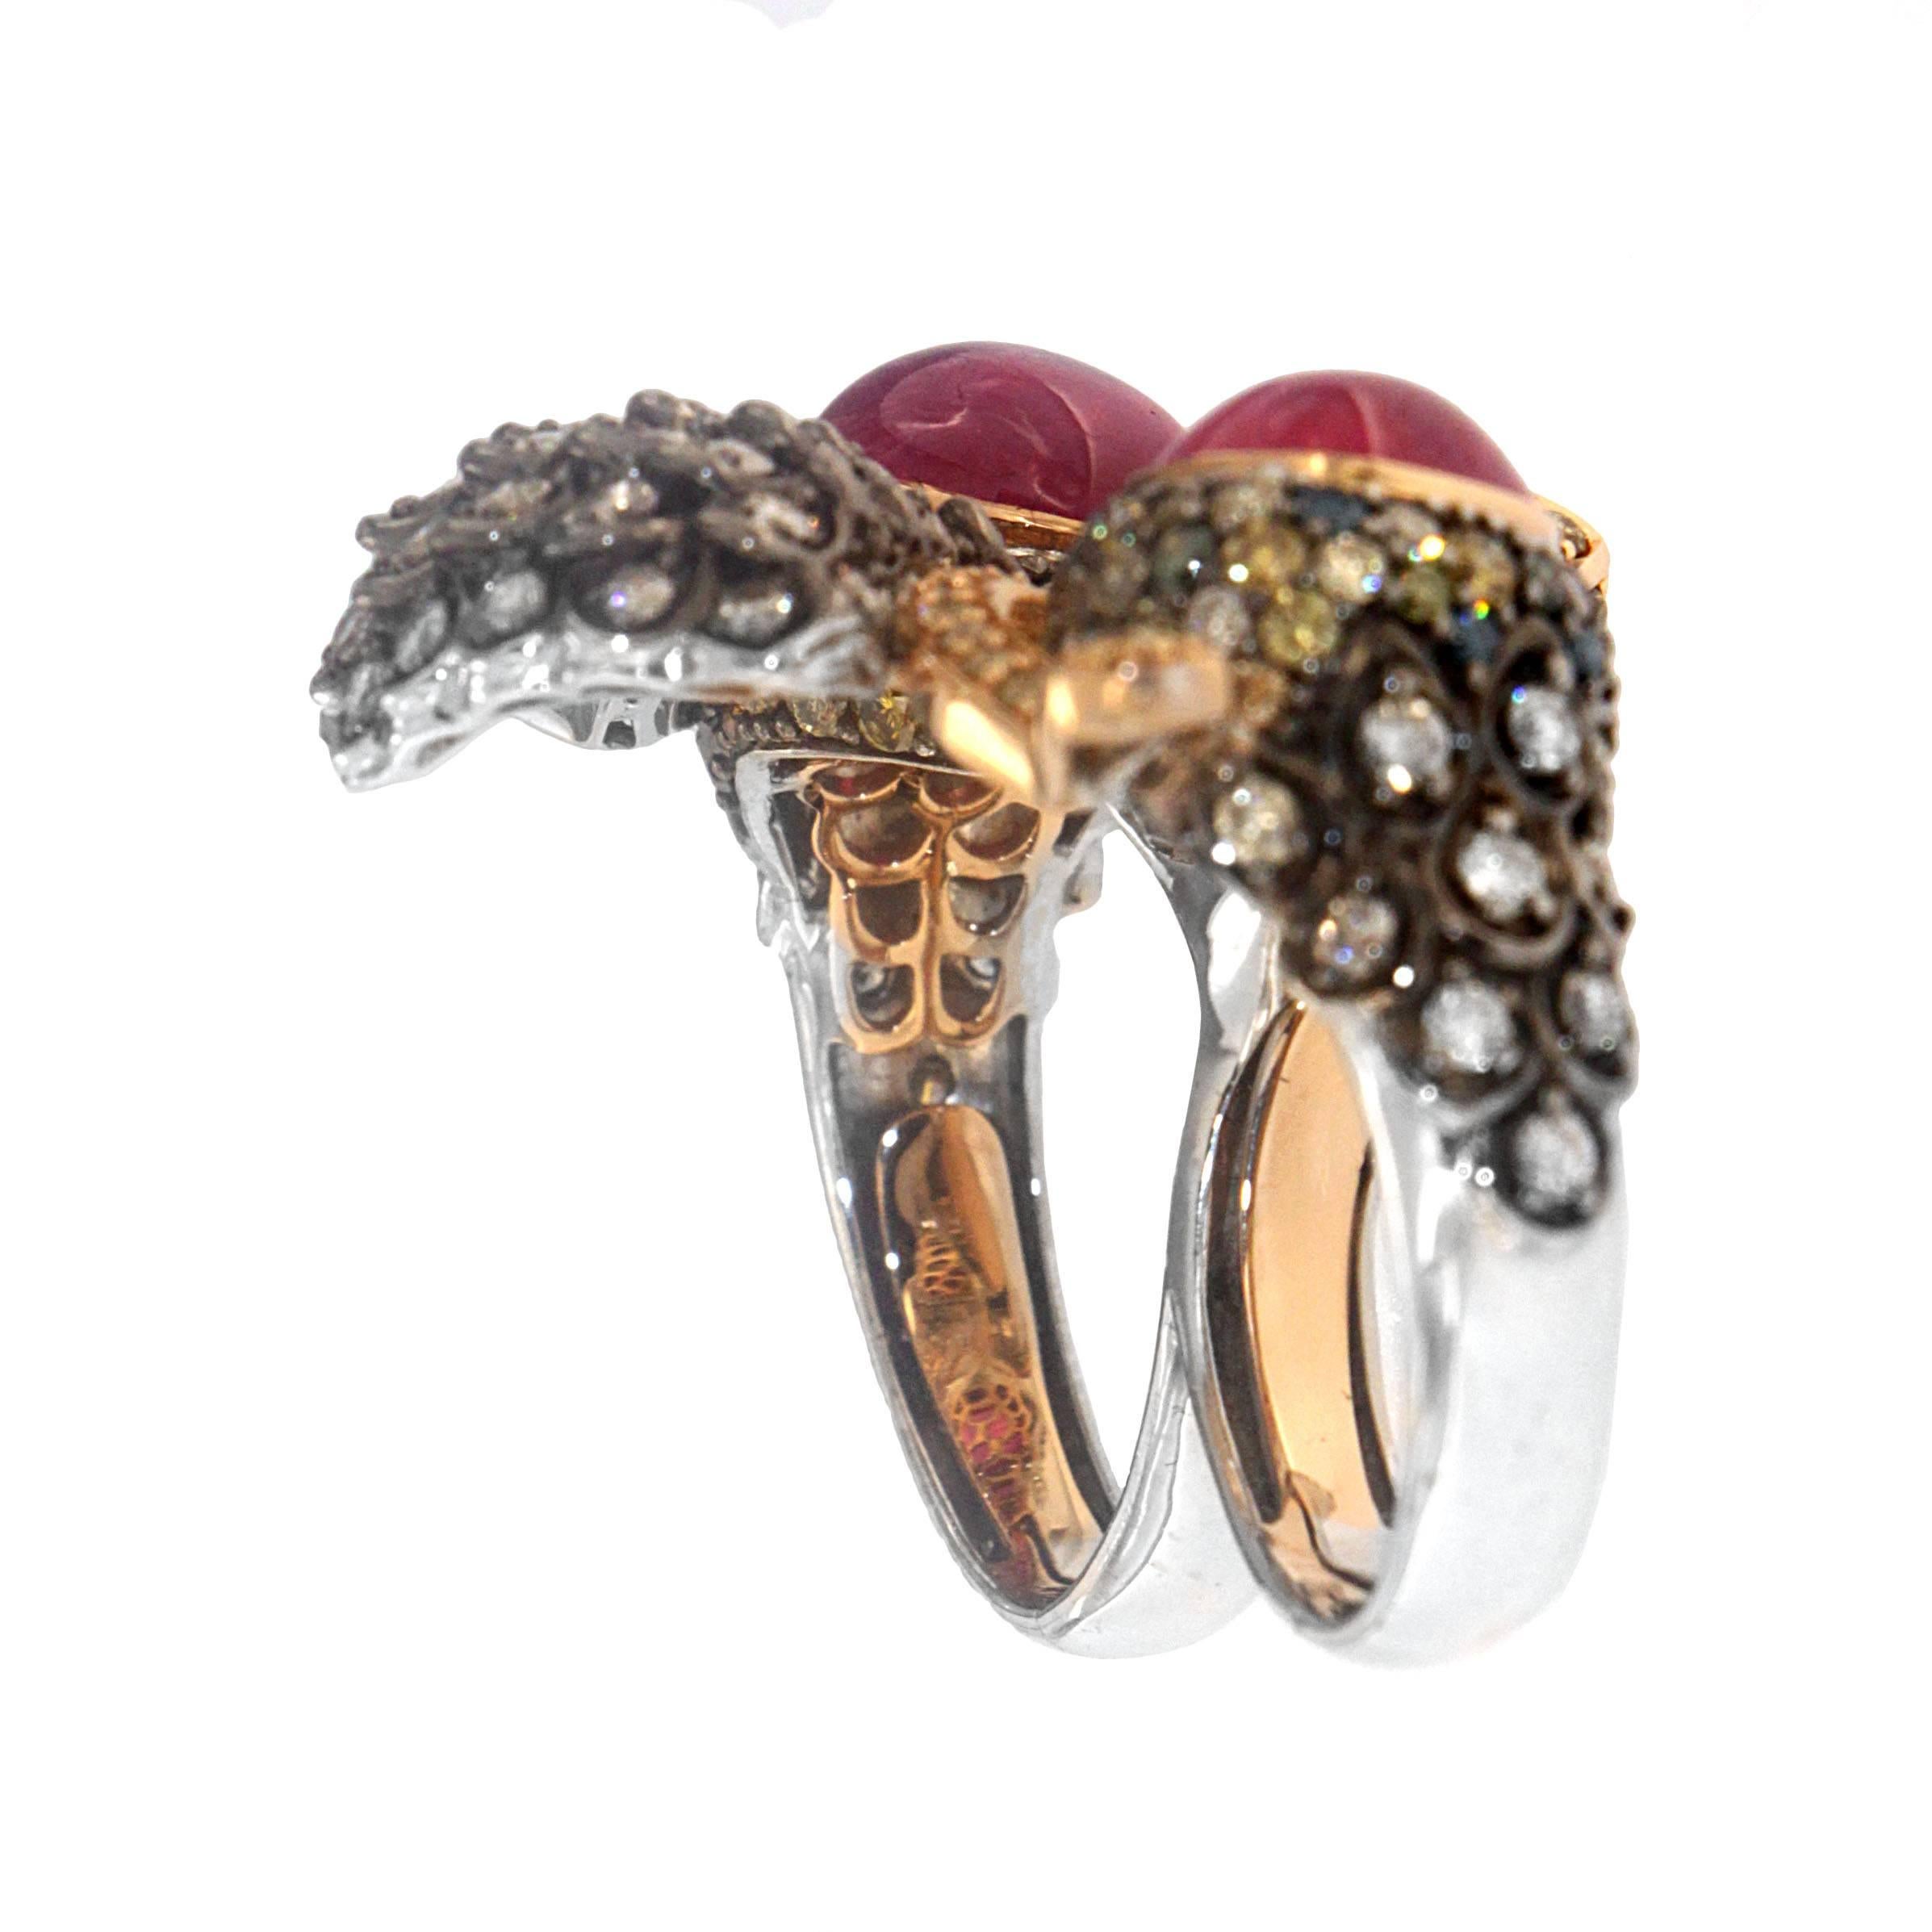 Wisdom is power, and this Zorab Creations Enlightened Ring exemplifies just that. Fashioned into the abstract shape of a wise owl, this item is both exquisite and unique as well as providing an illuminating sparkle. The eyes are set with a stunning